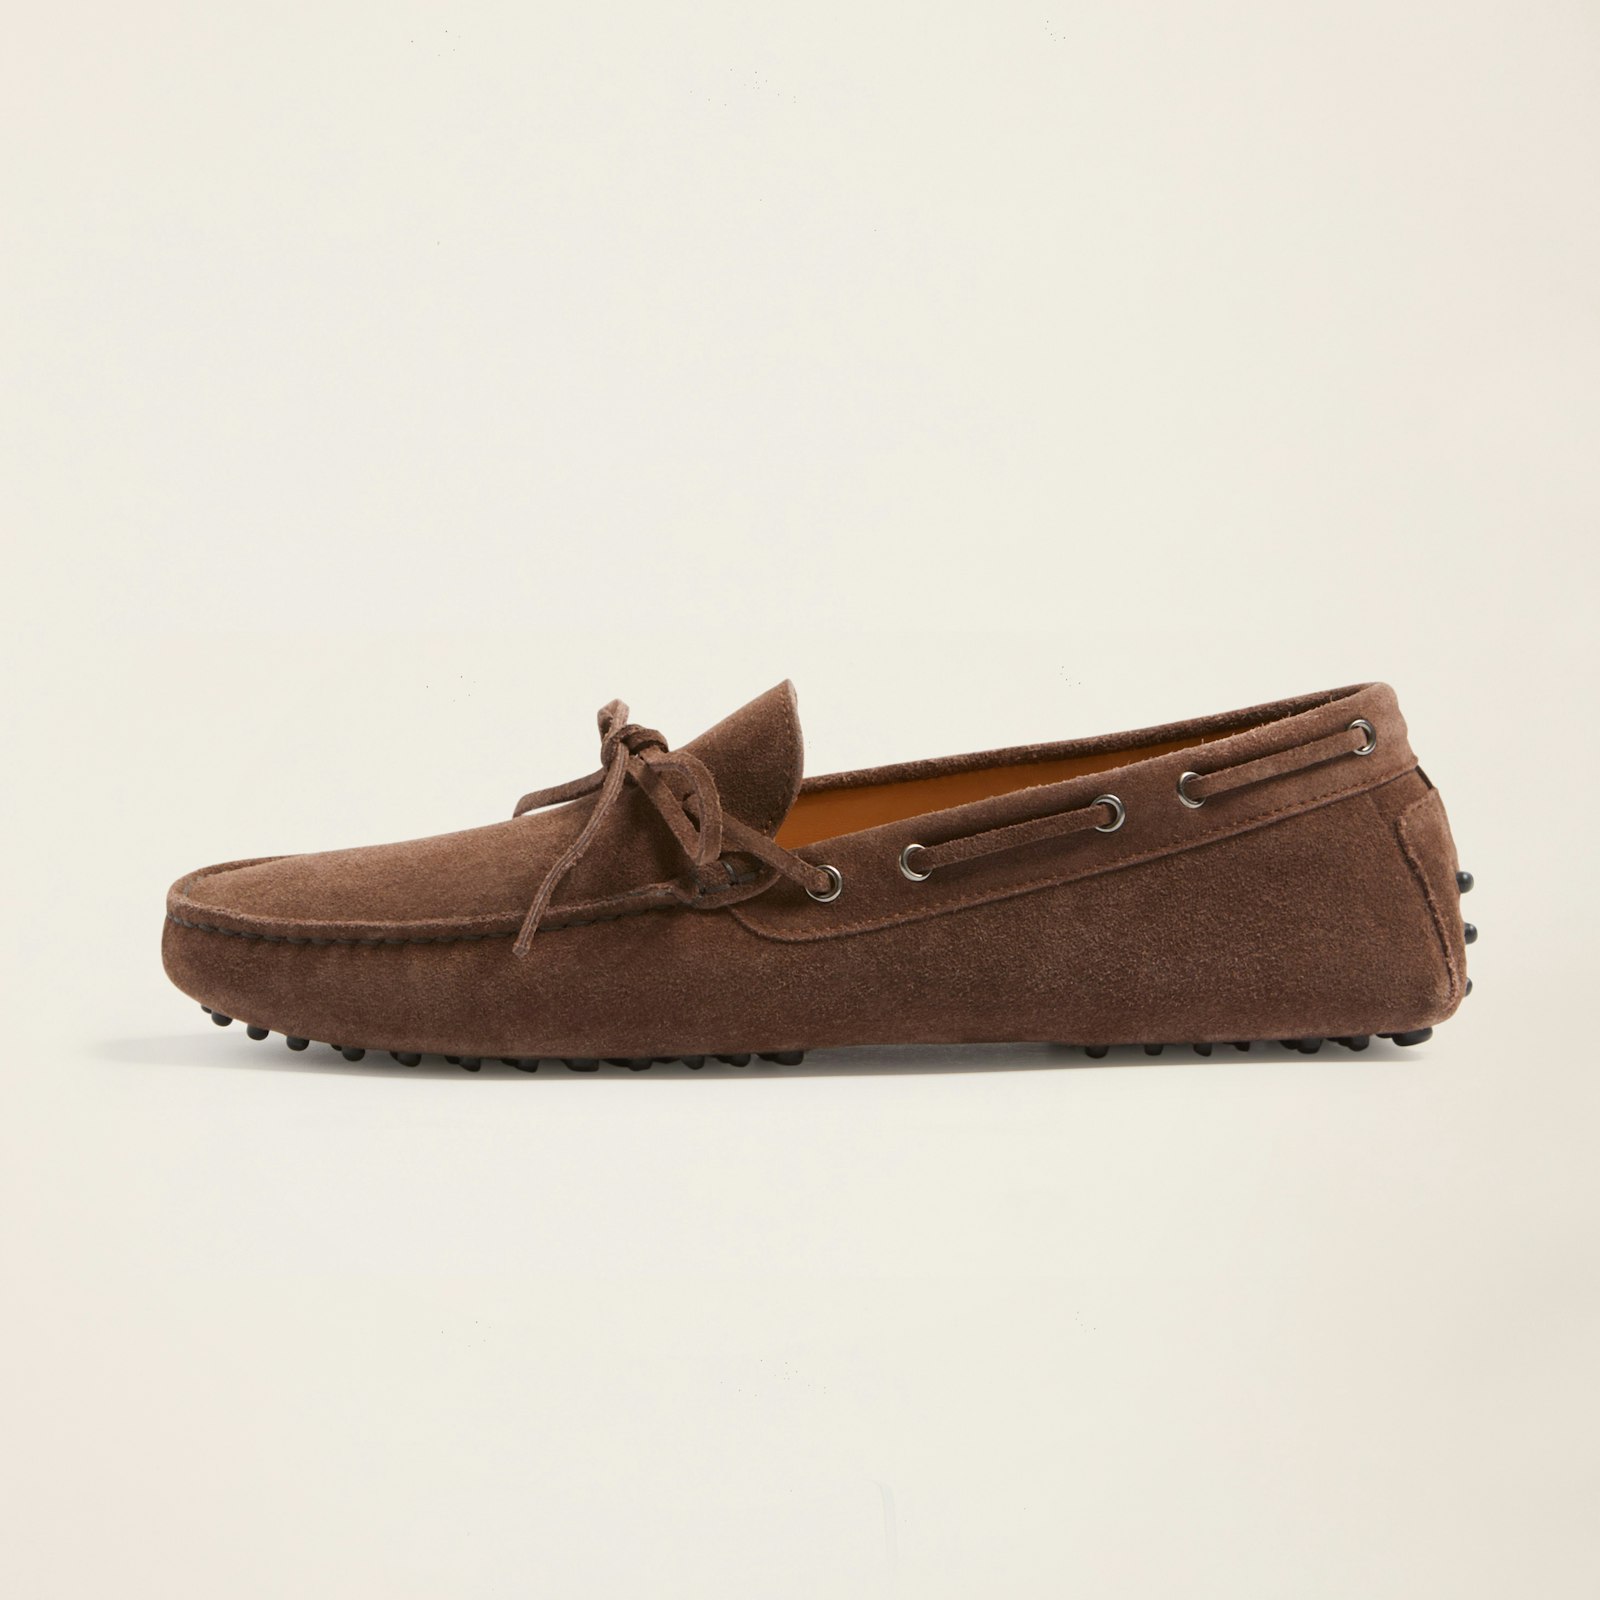 Lucca_LaceUp_DrivingShoe_Chocolate_1x1_LEFT_0332.jpg